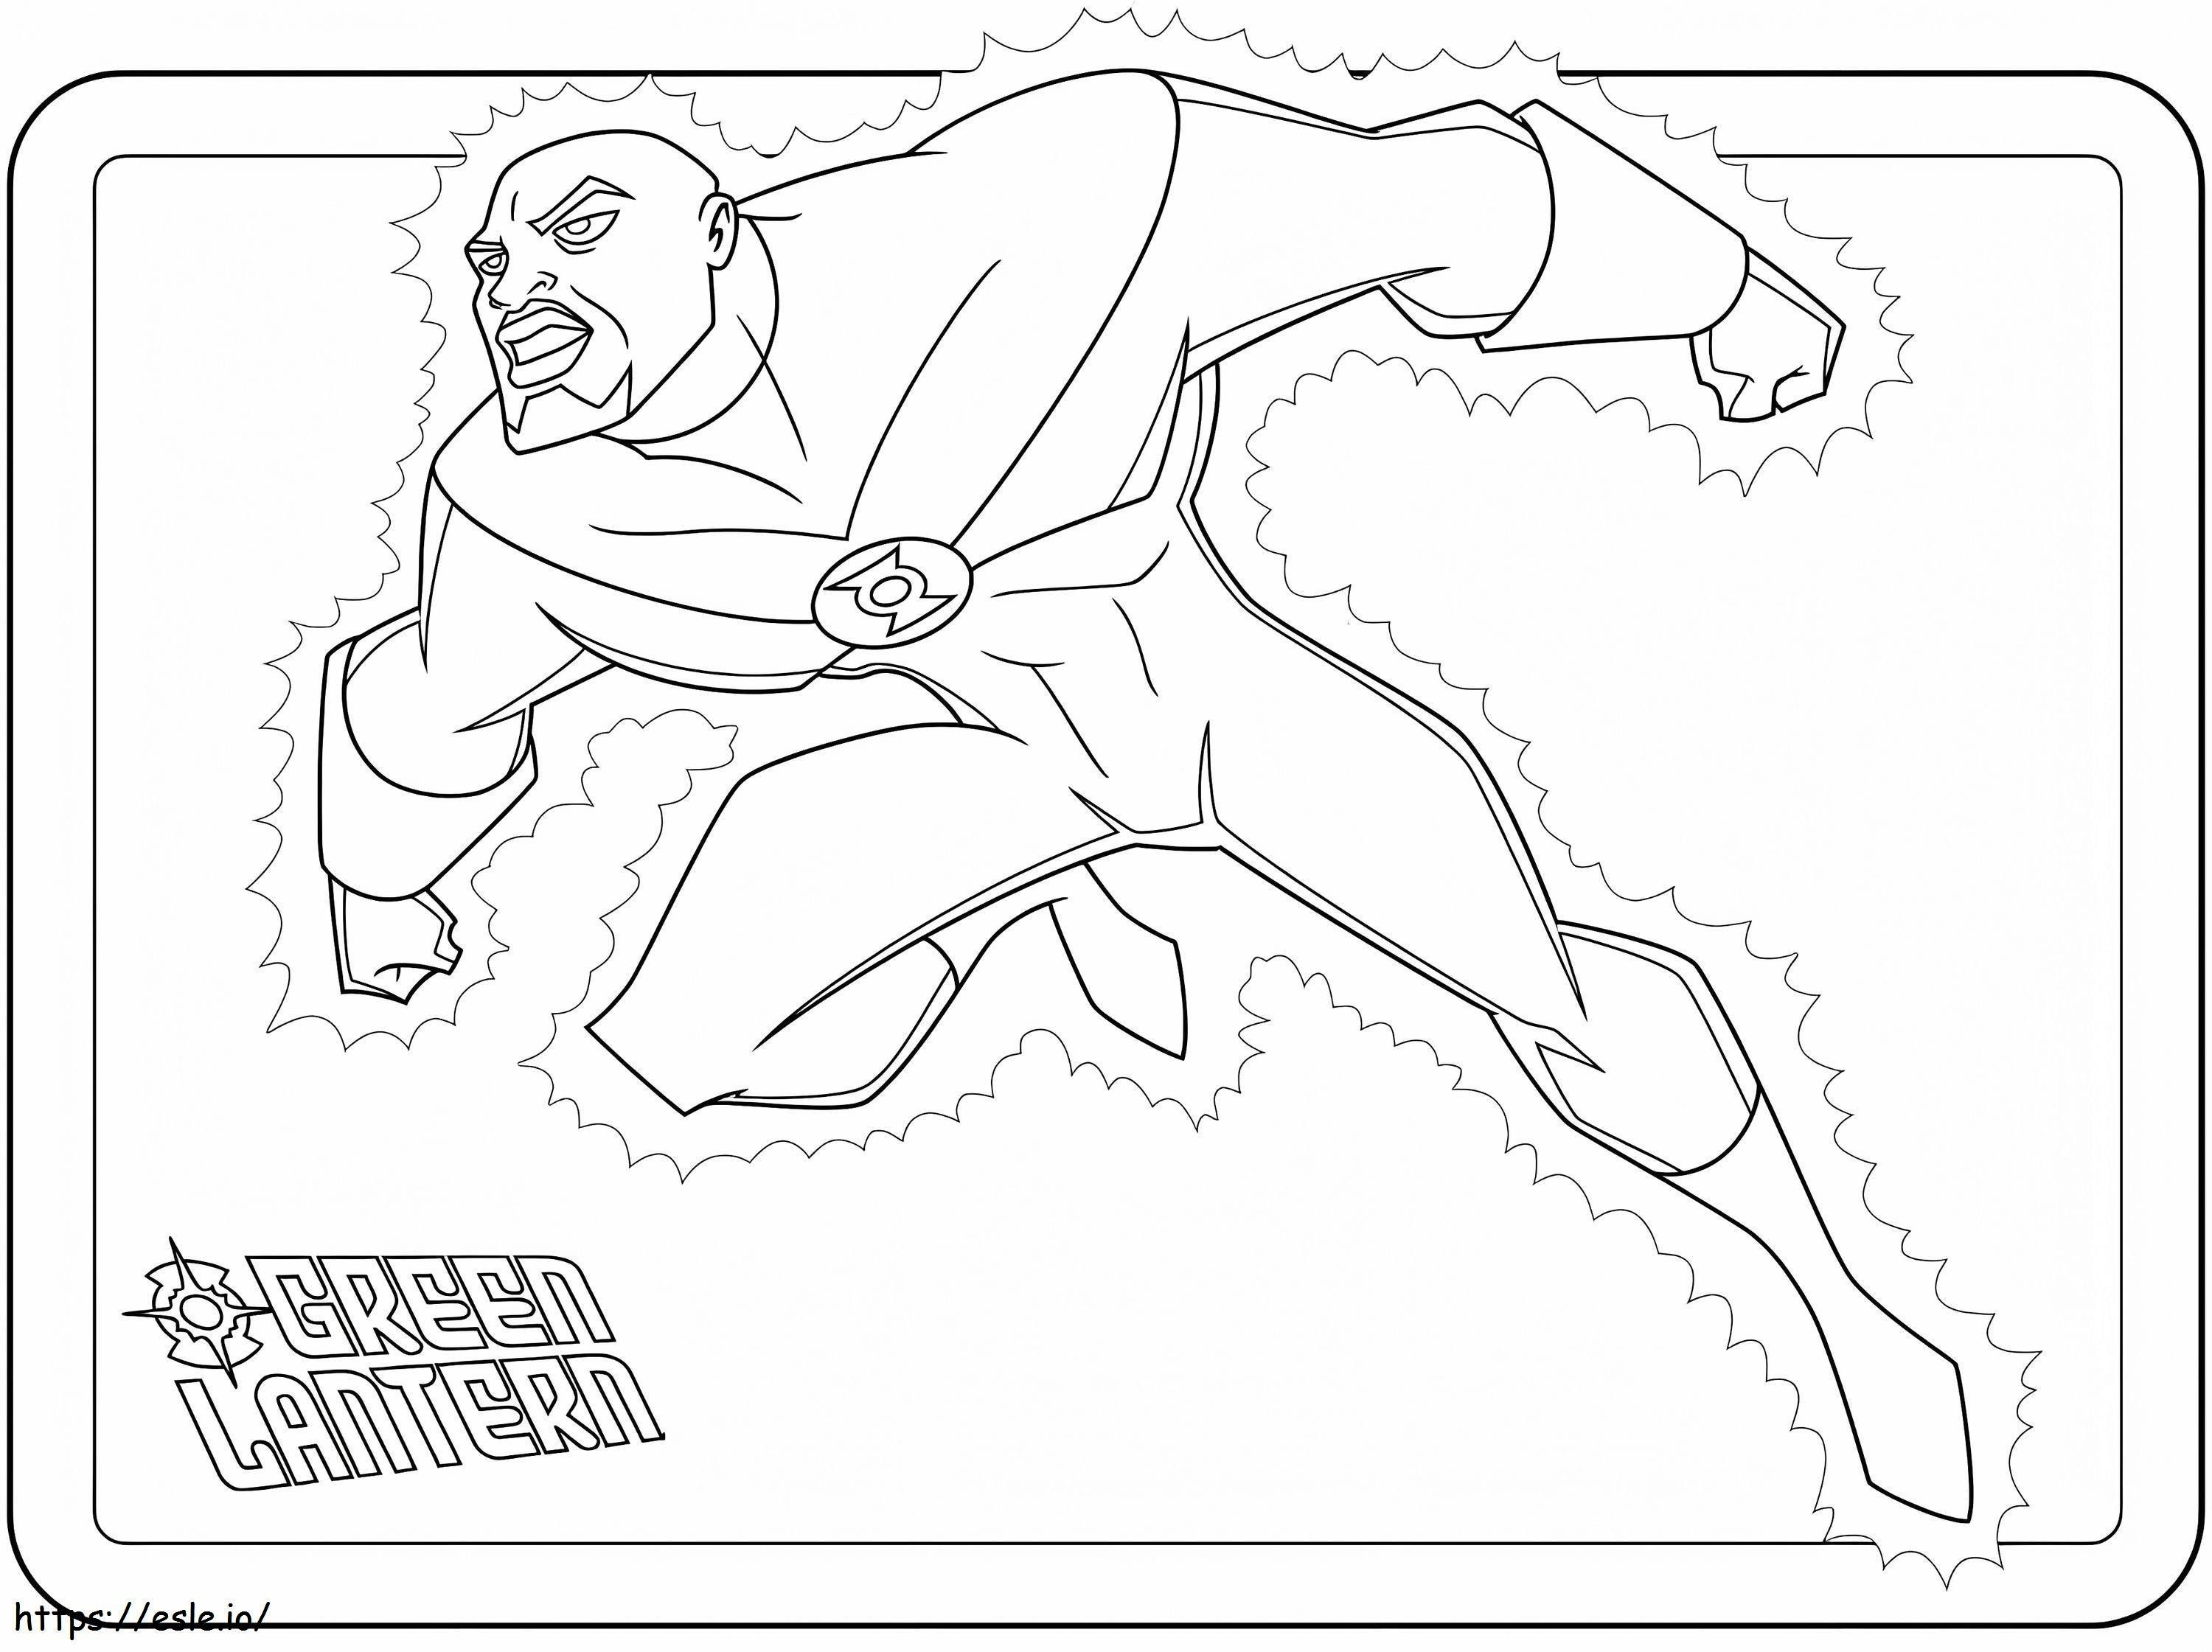 Angry Green Lantern coloring page